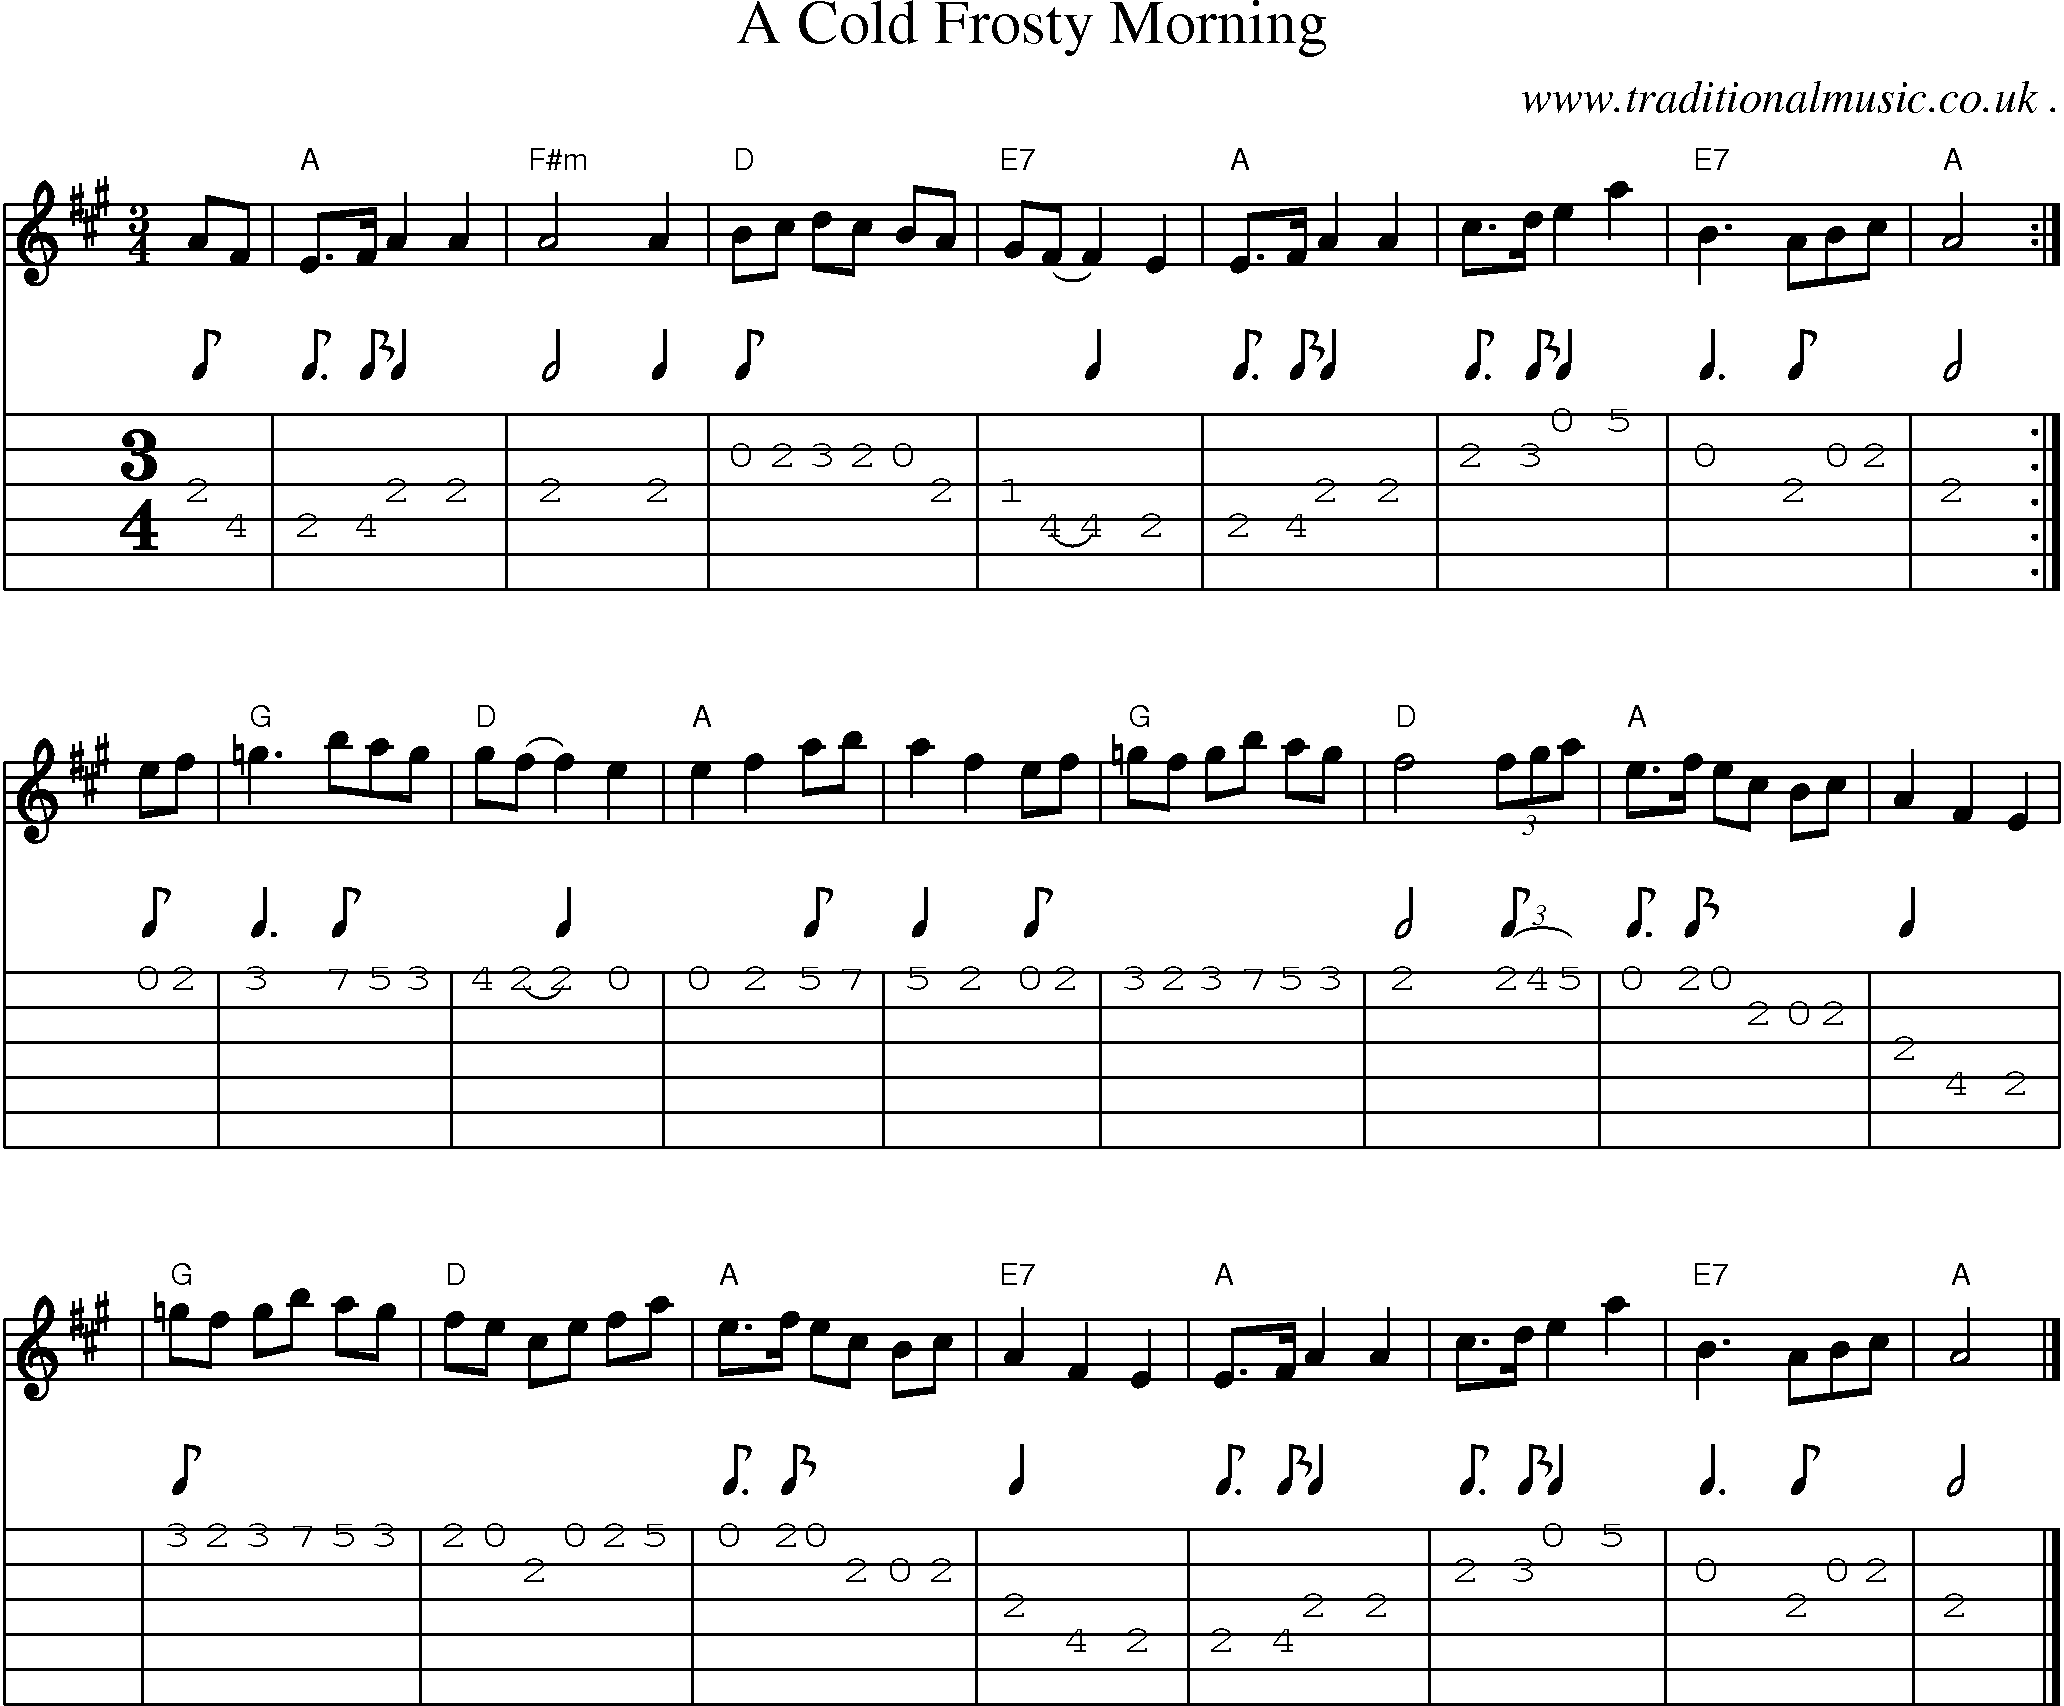 Sheet-music  score, Chords and Guitar Tabs for A Cold Frosty Morning